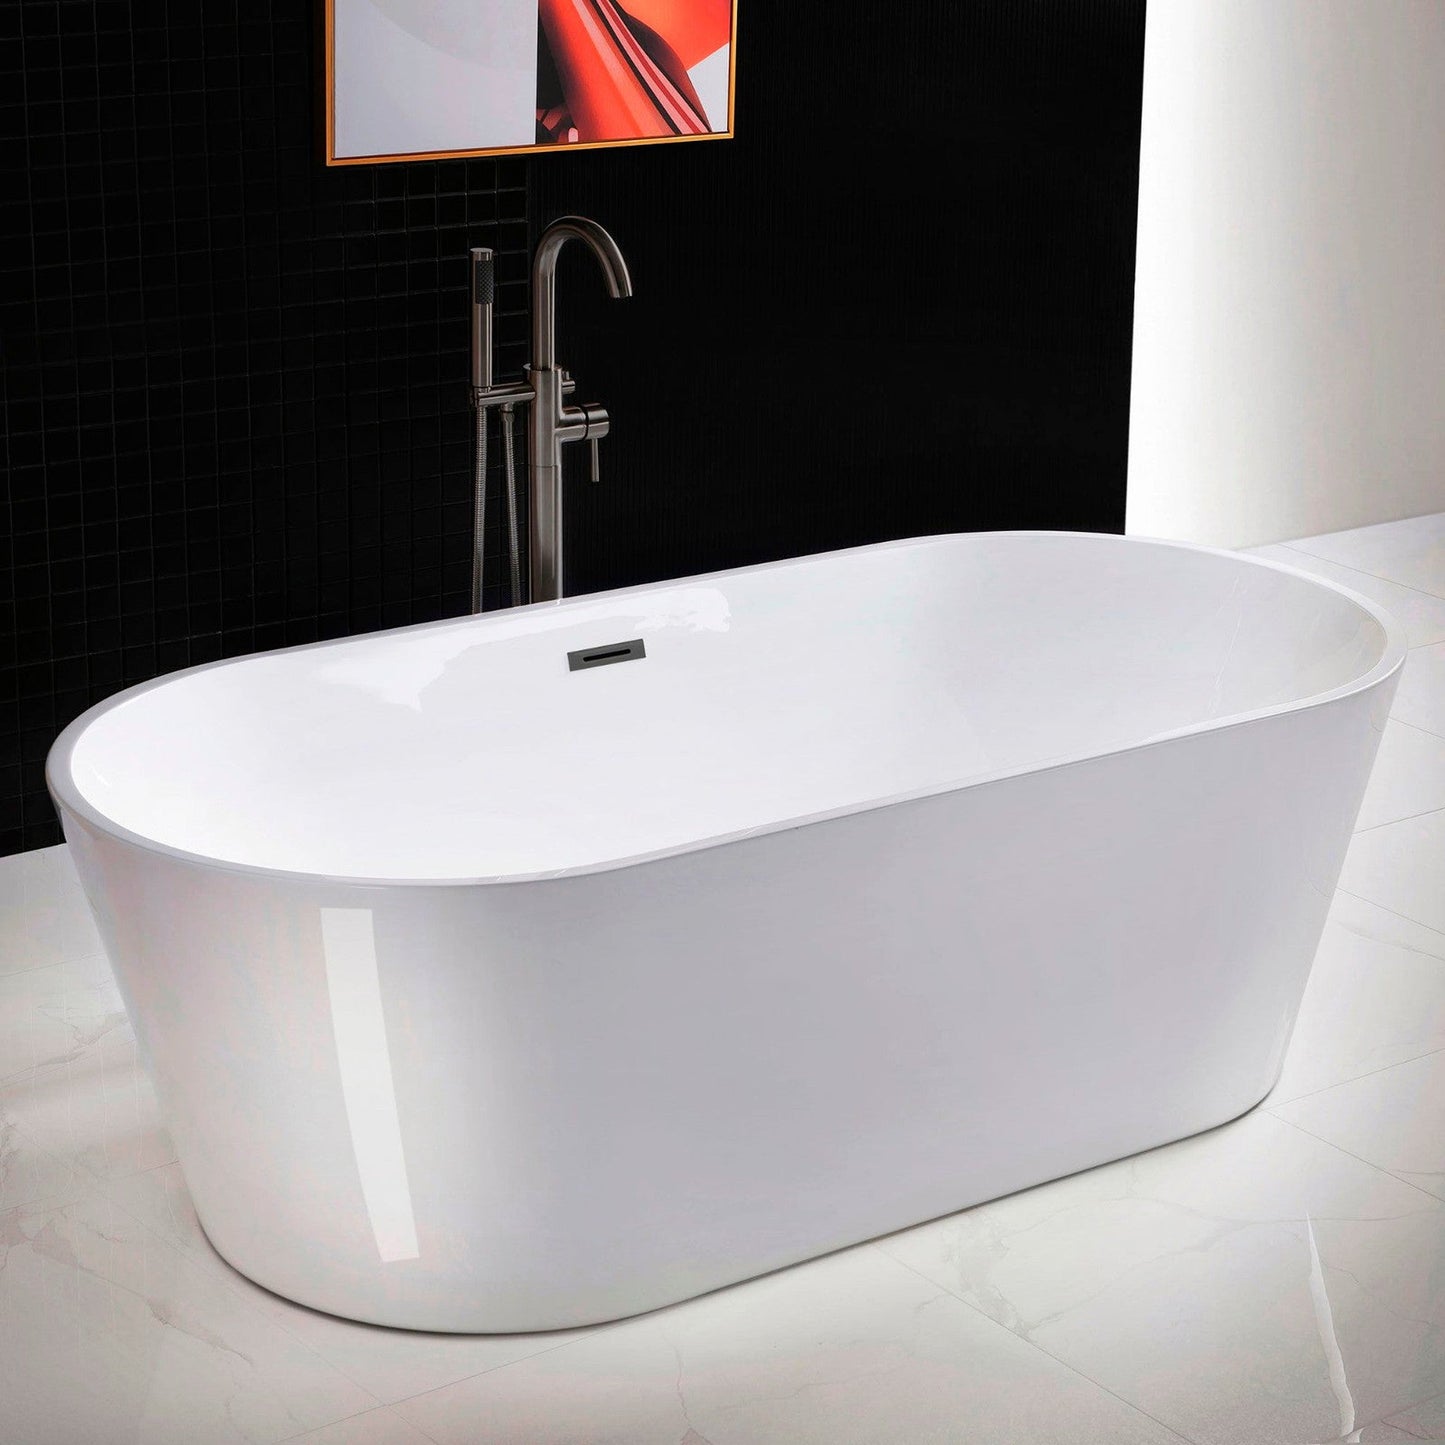 WoodBridge 71" White Acrylic Freestanding Contemporary Soaking Bathtub With Matte Black Drain, Overflow, F0009 Tub Filler and Caddy Tray